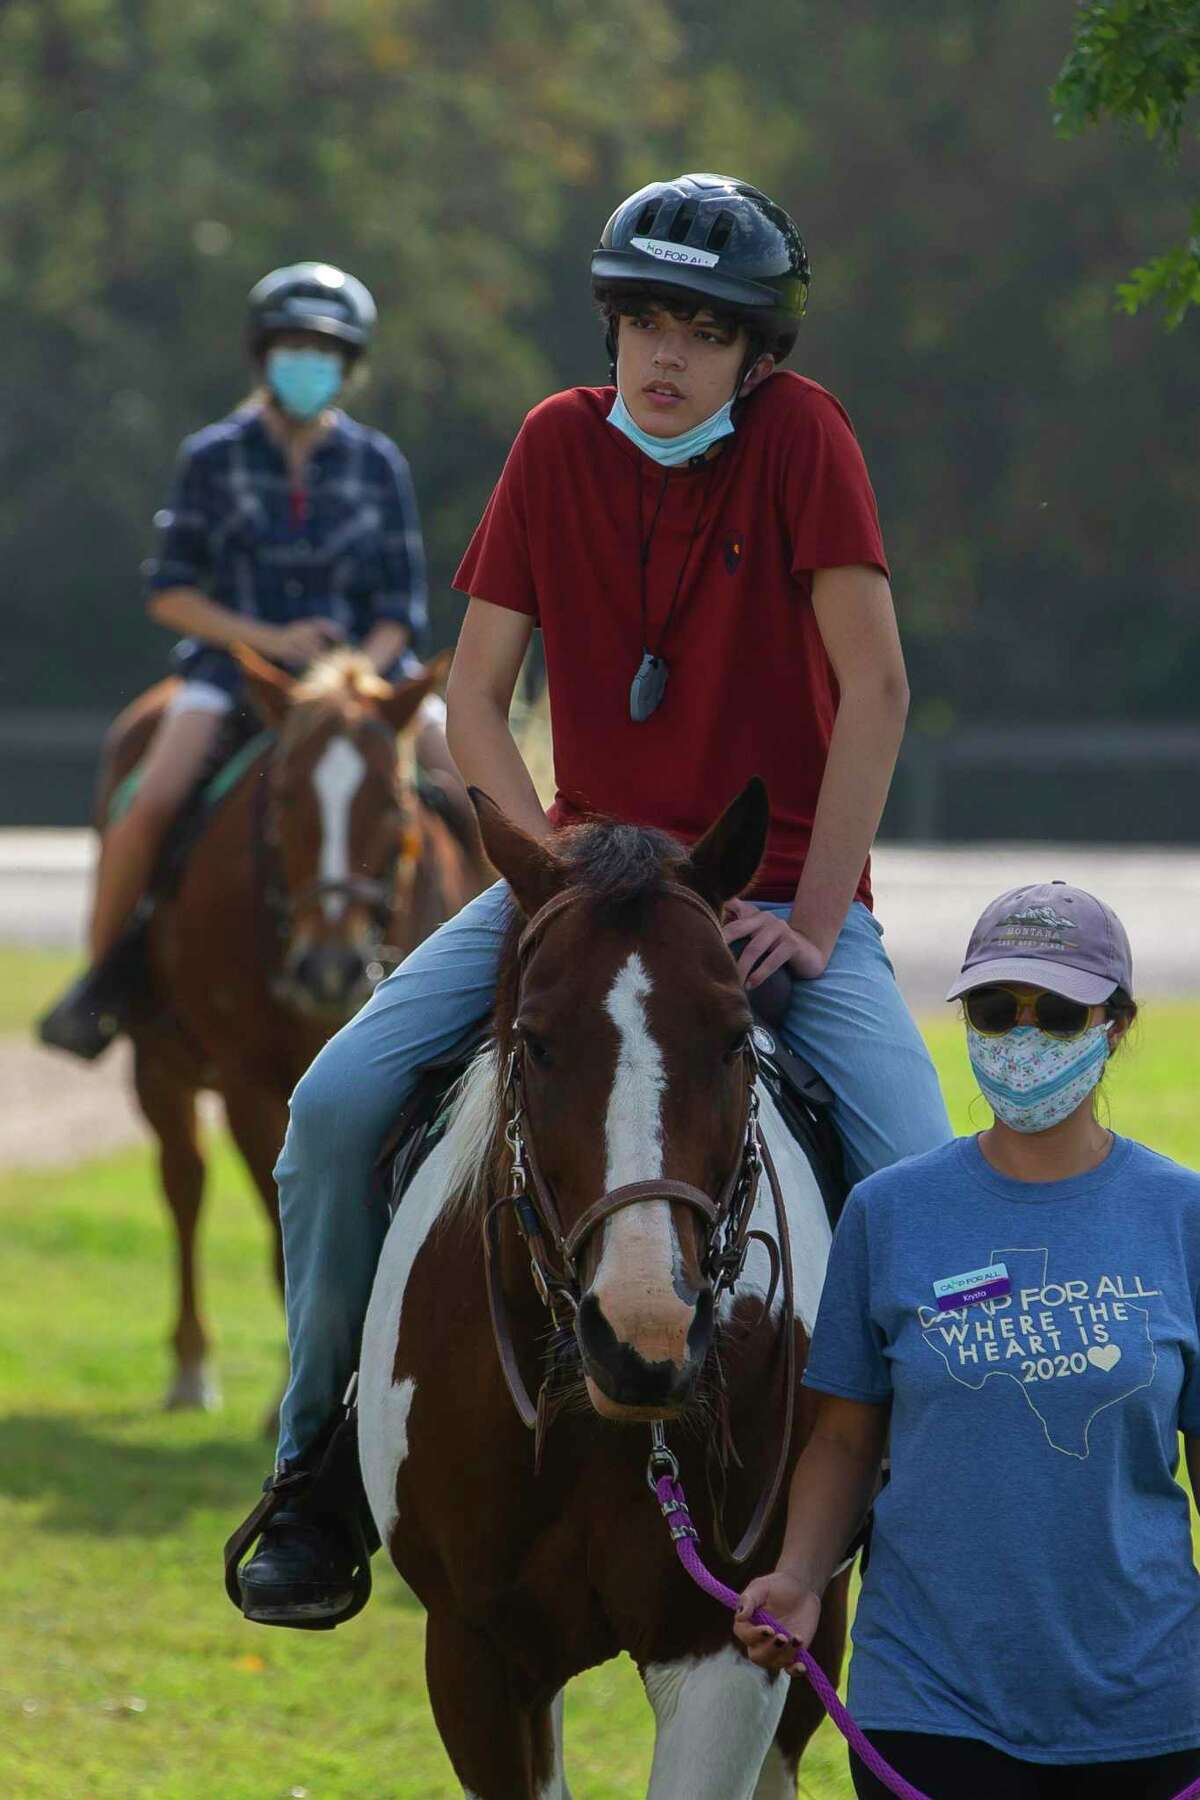 Paul Perez rides horses with his mother, Suzanne Garofalo, at Camp For All, Saturday, Oct. 10, 2020, in Burton, TX.